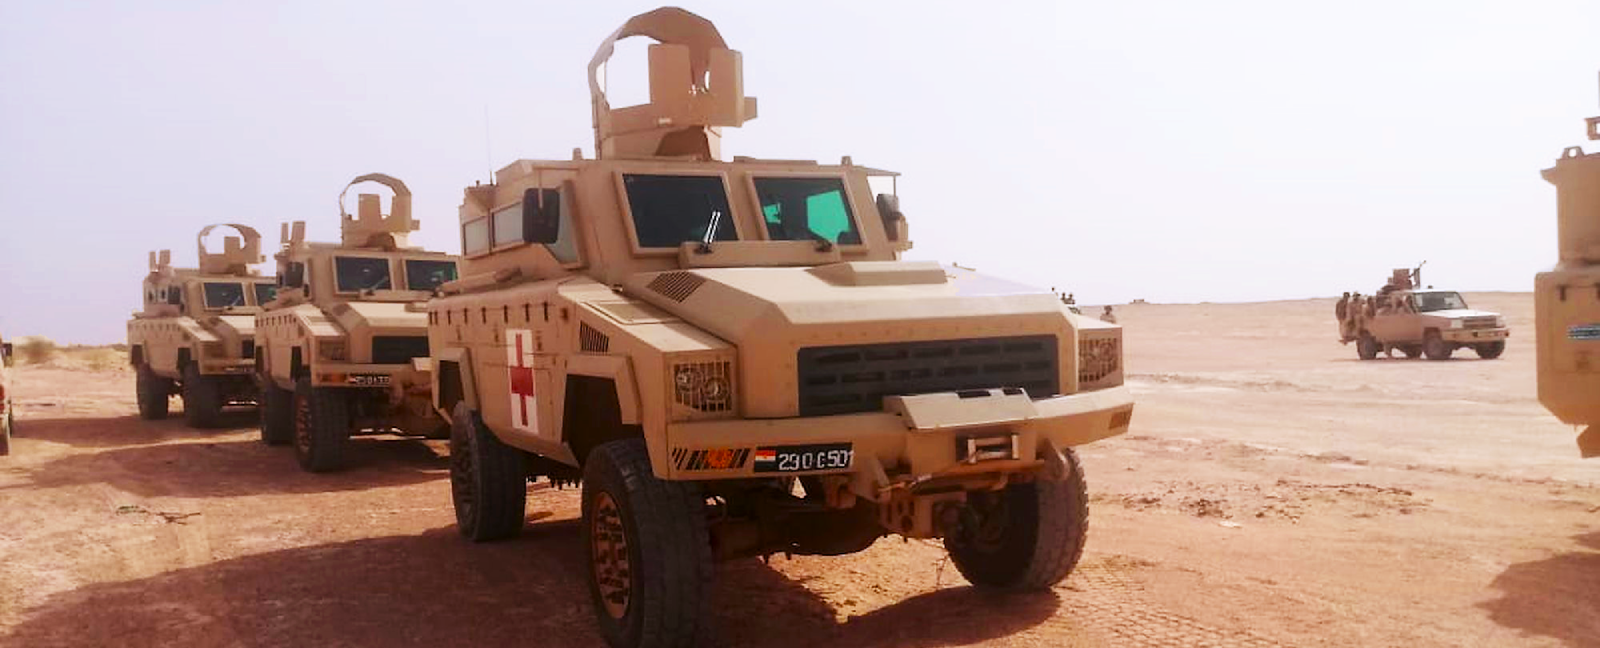 Armored personnel carriers supporting the G5 Sahel Joint Force in northern Niger.